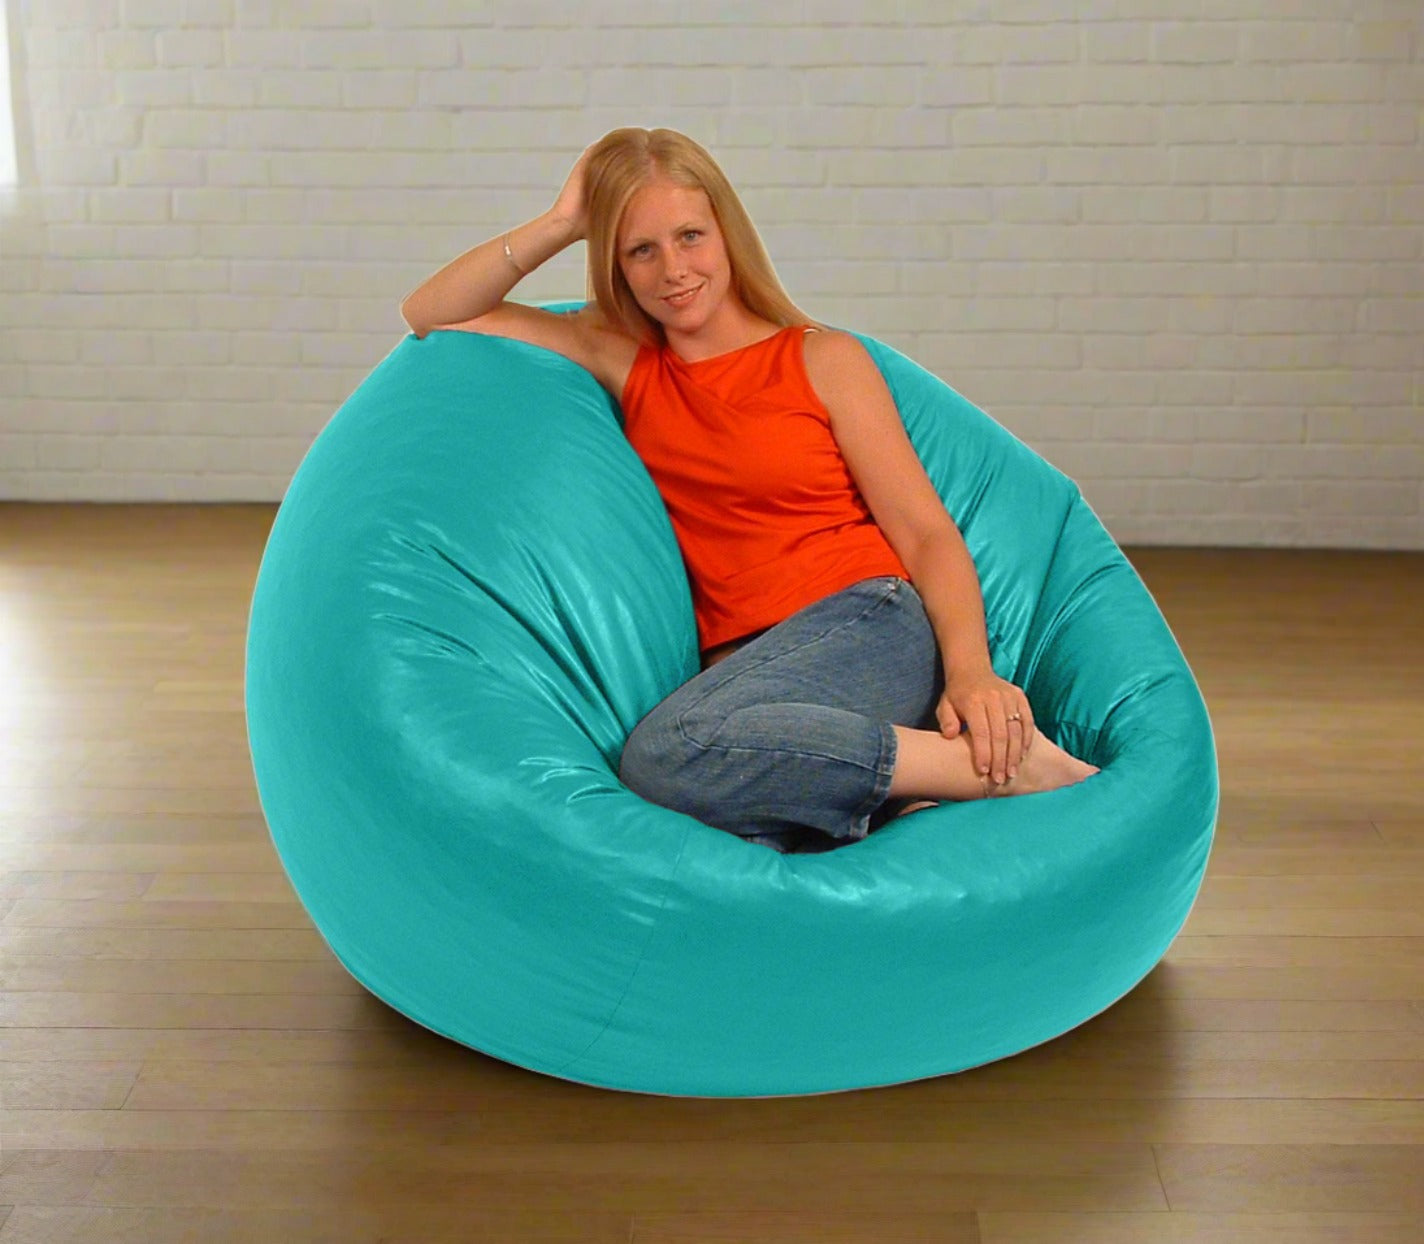 Vinyl Bean Bag Chair - ComfyBean Adult size lounger classic style